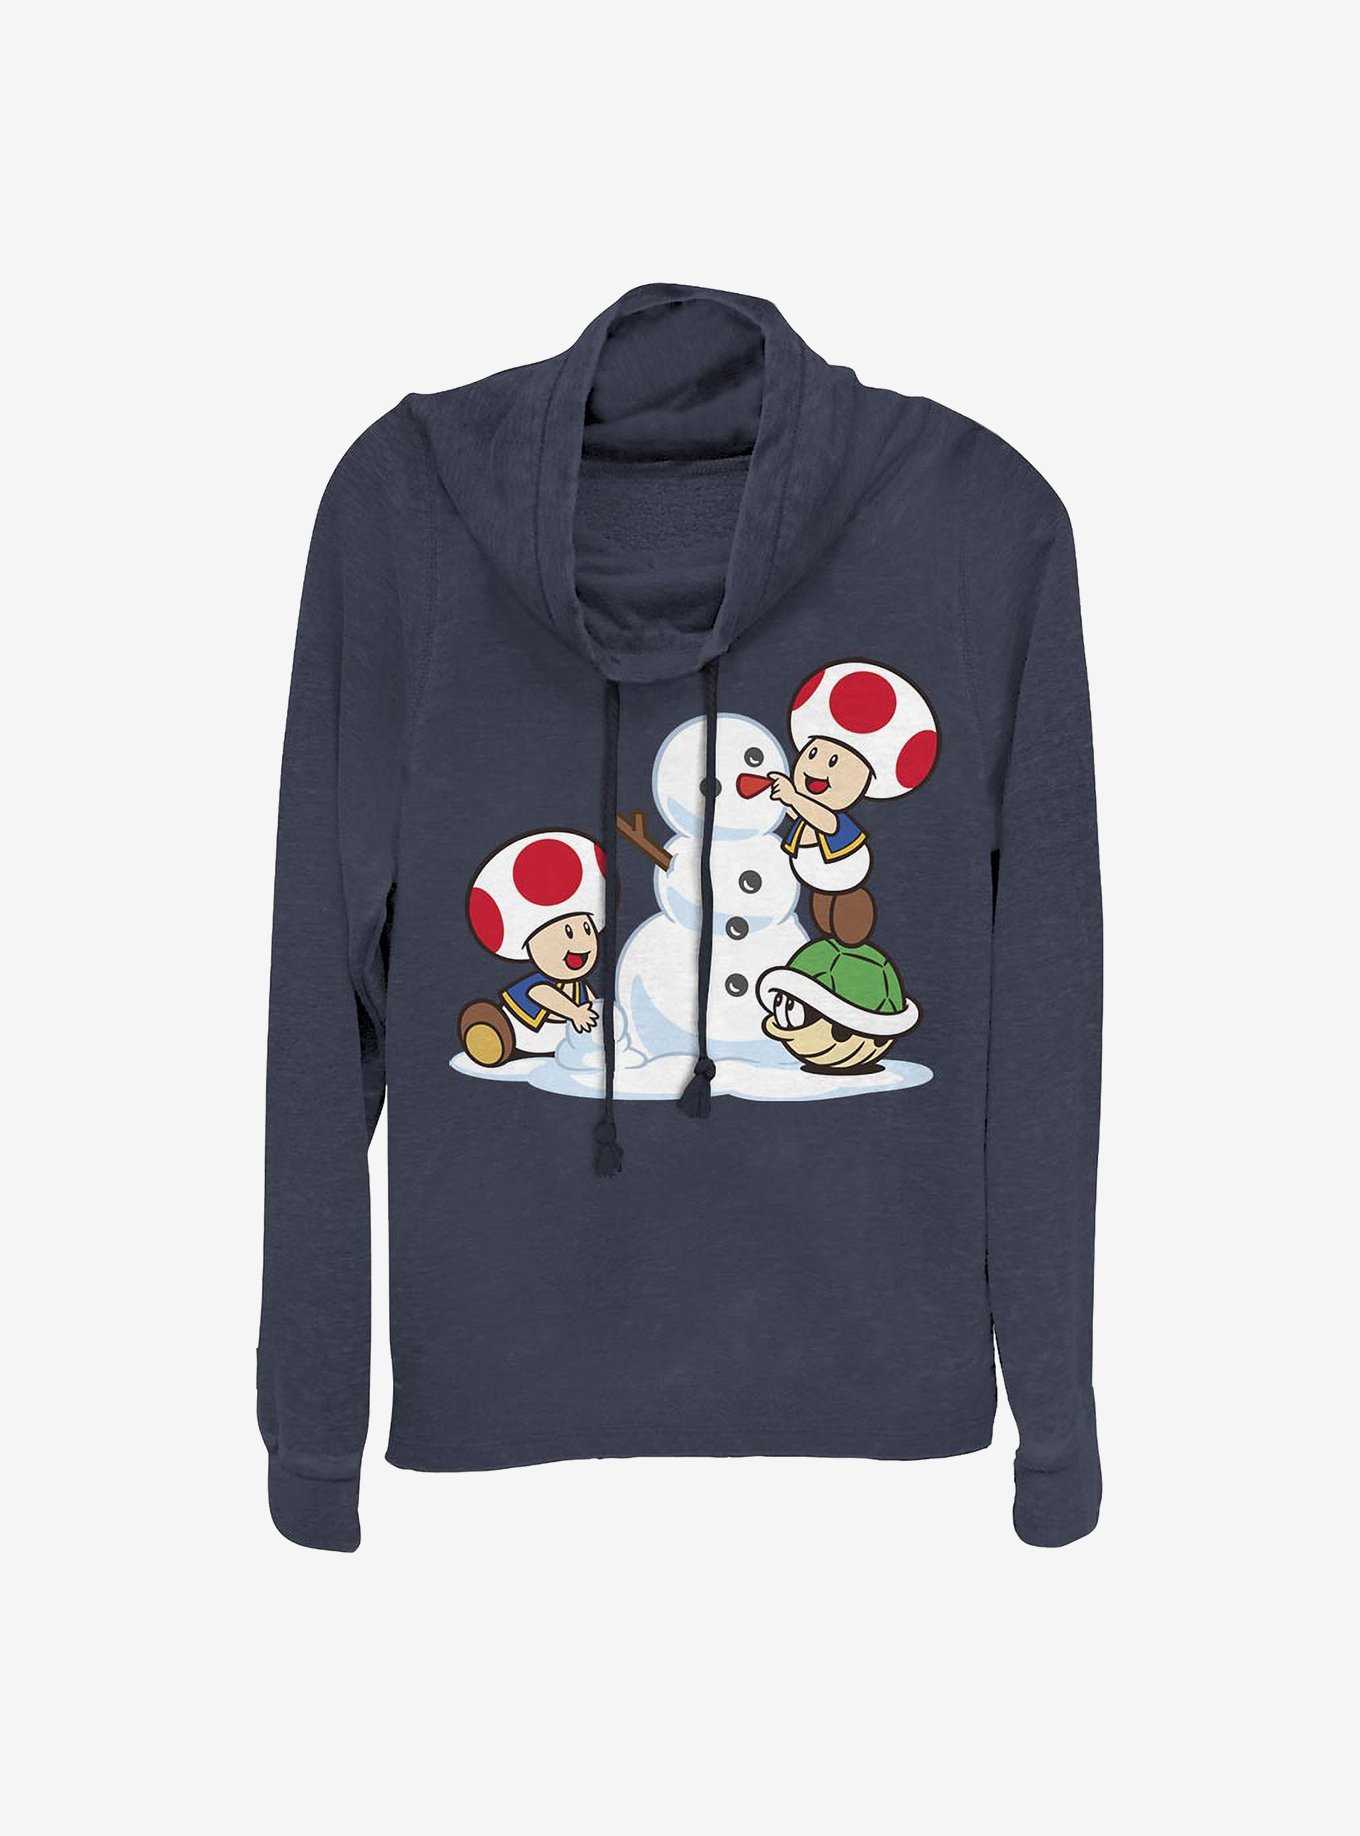 Super Mario Frosty Toad Holiday Cowl Neck Long-Sleeve Girls Top, , hi-res